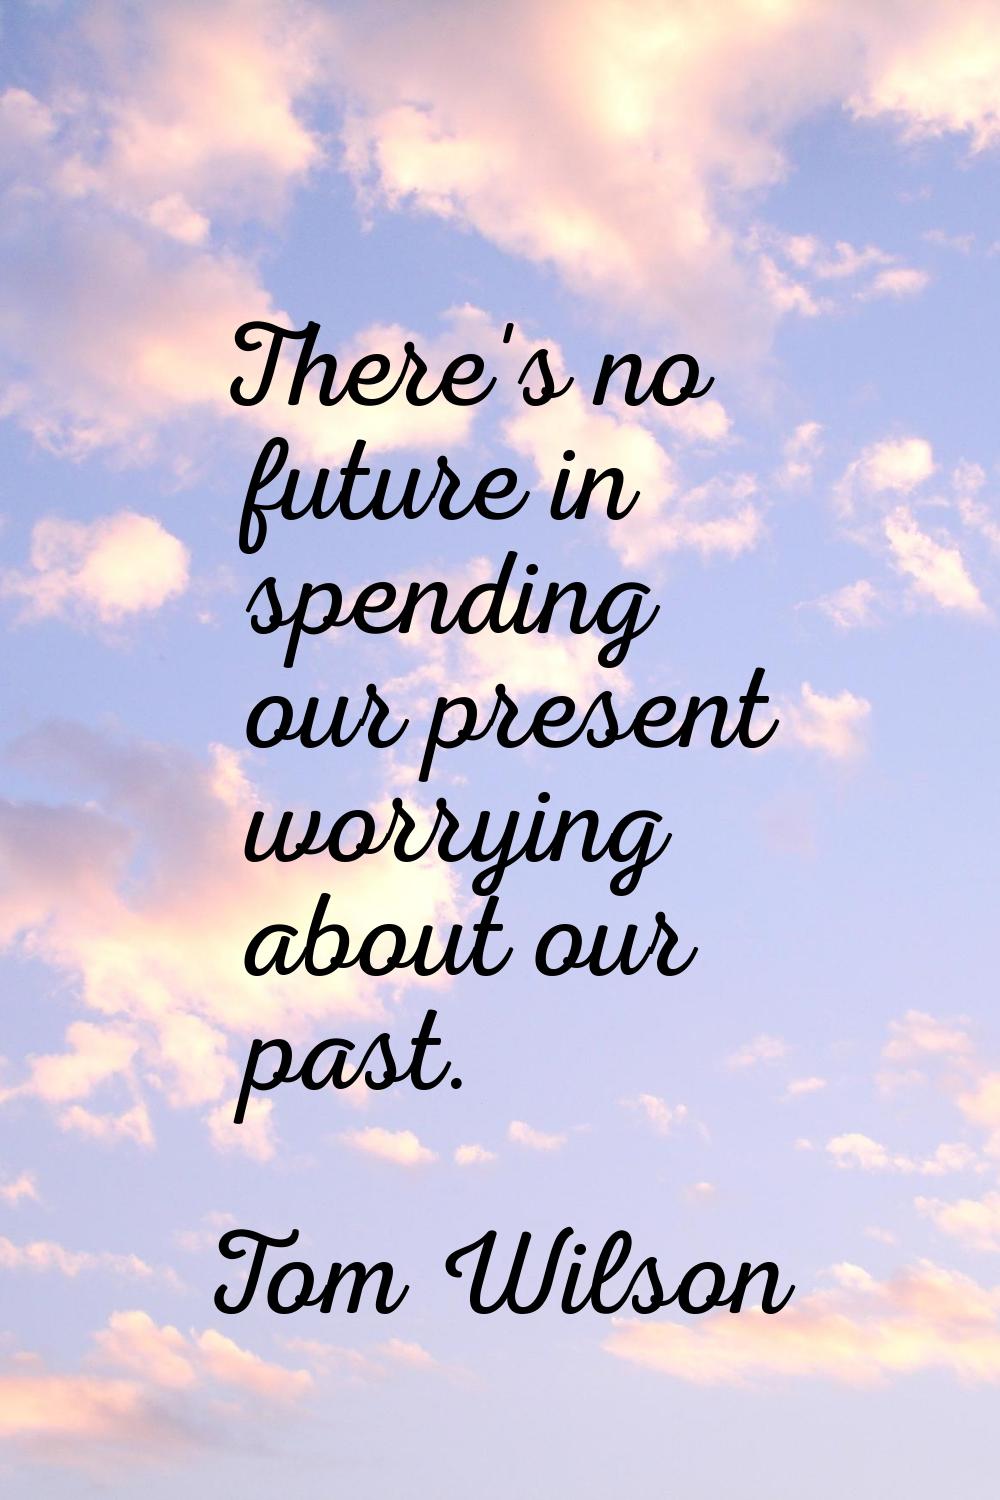 There's no future in spending our present worrying about our past.